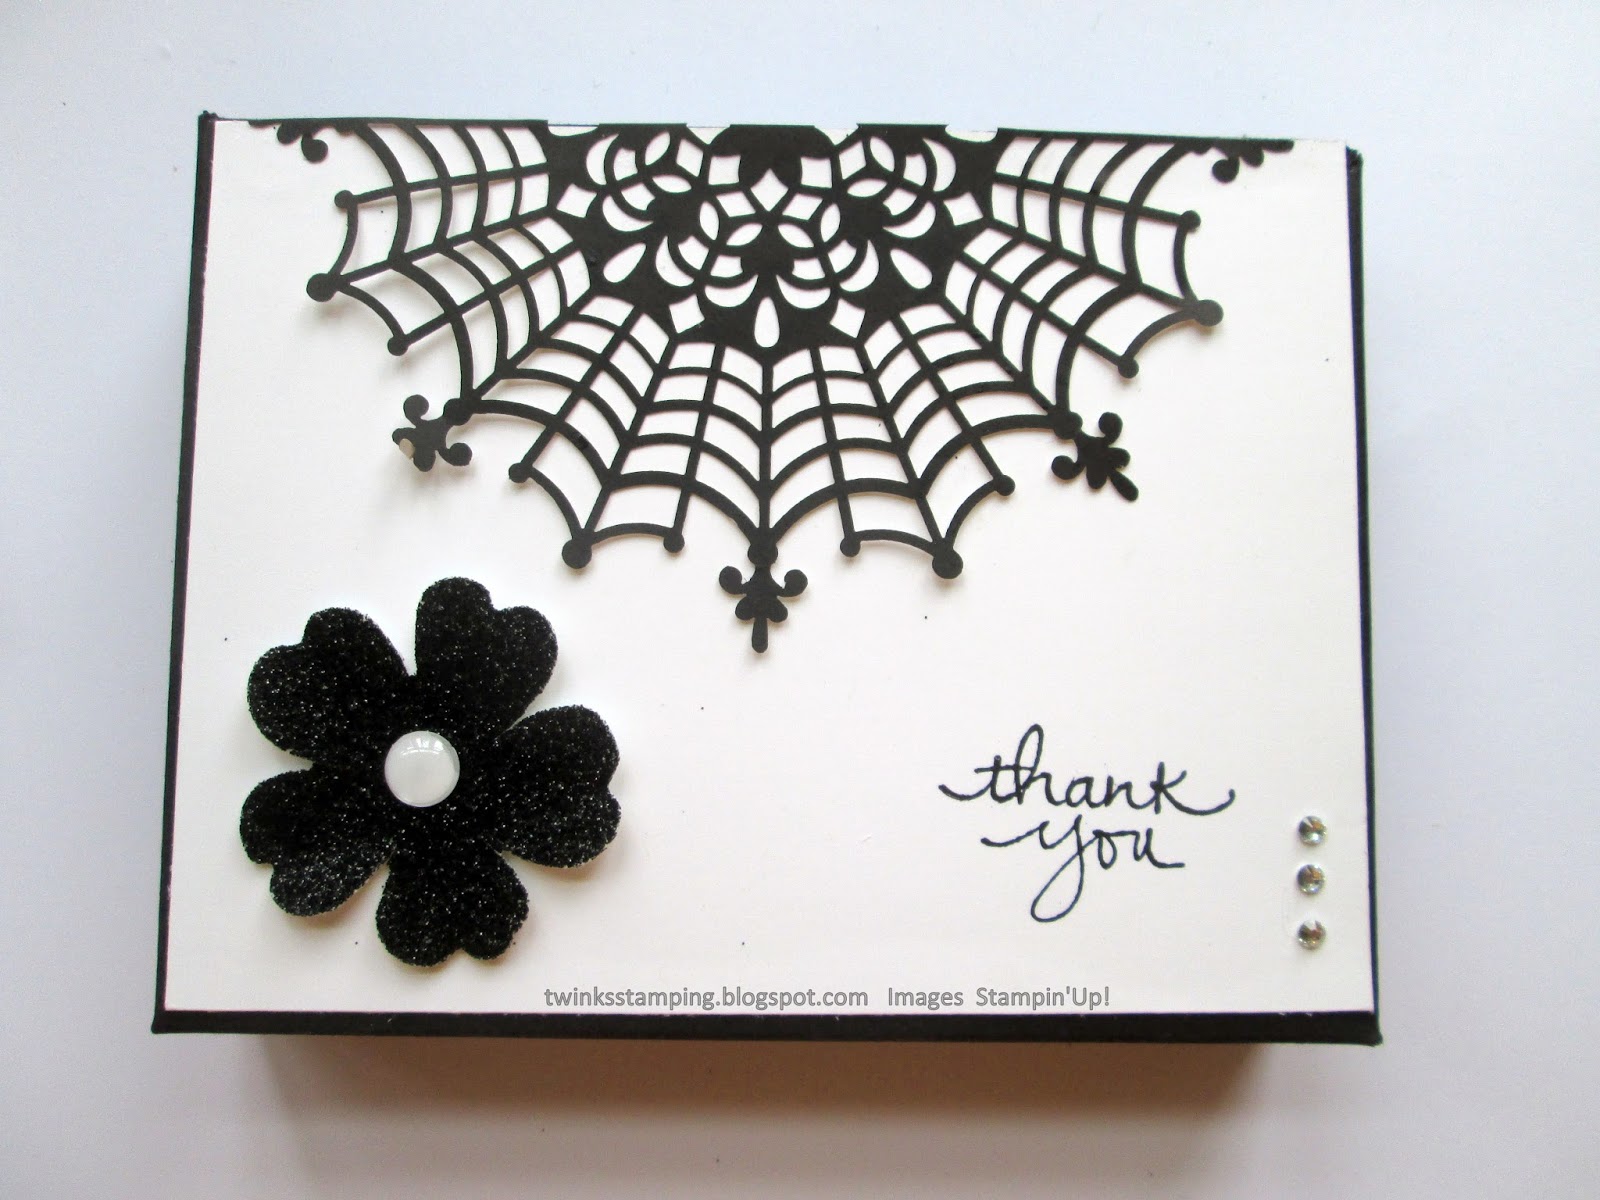 Black & white – Thank you cards